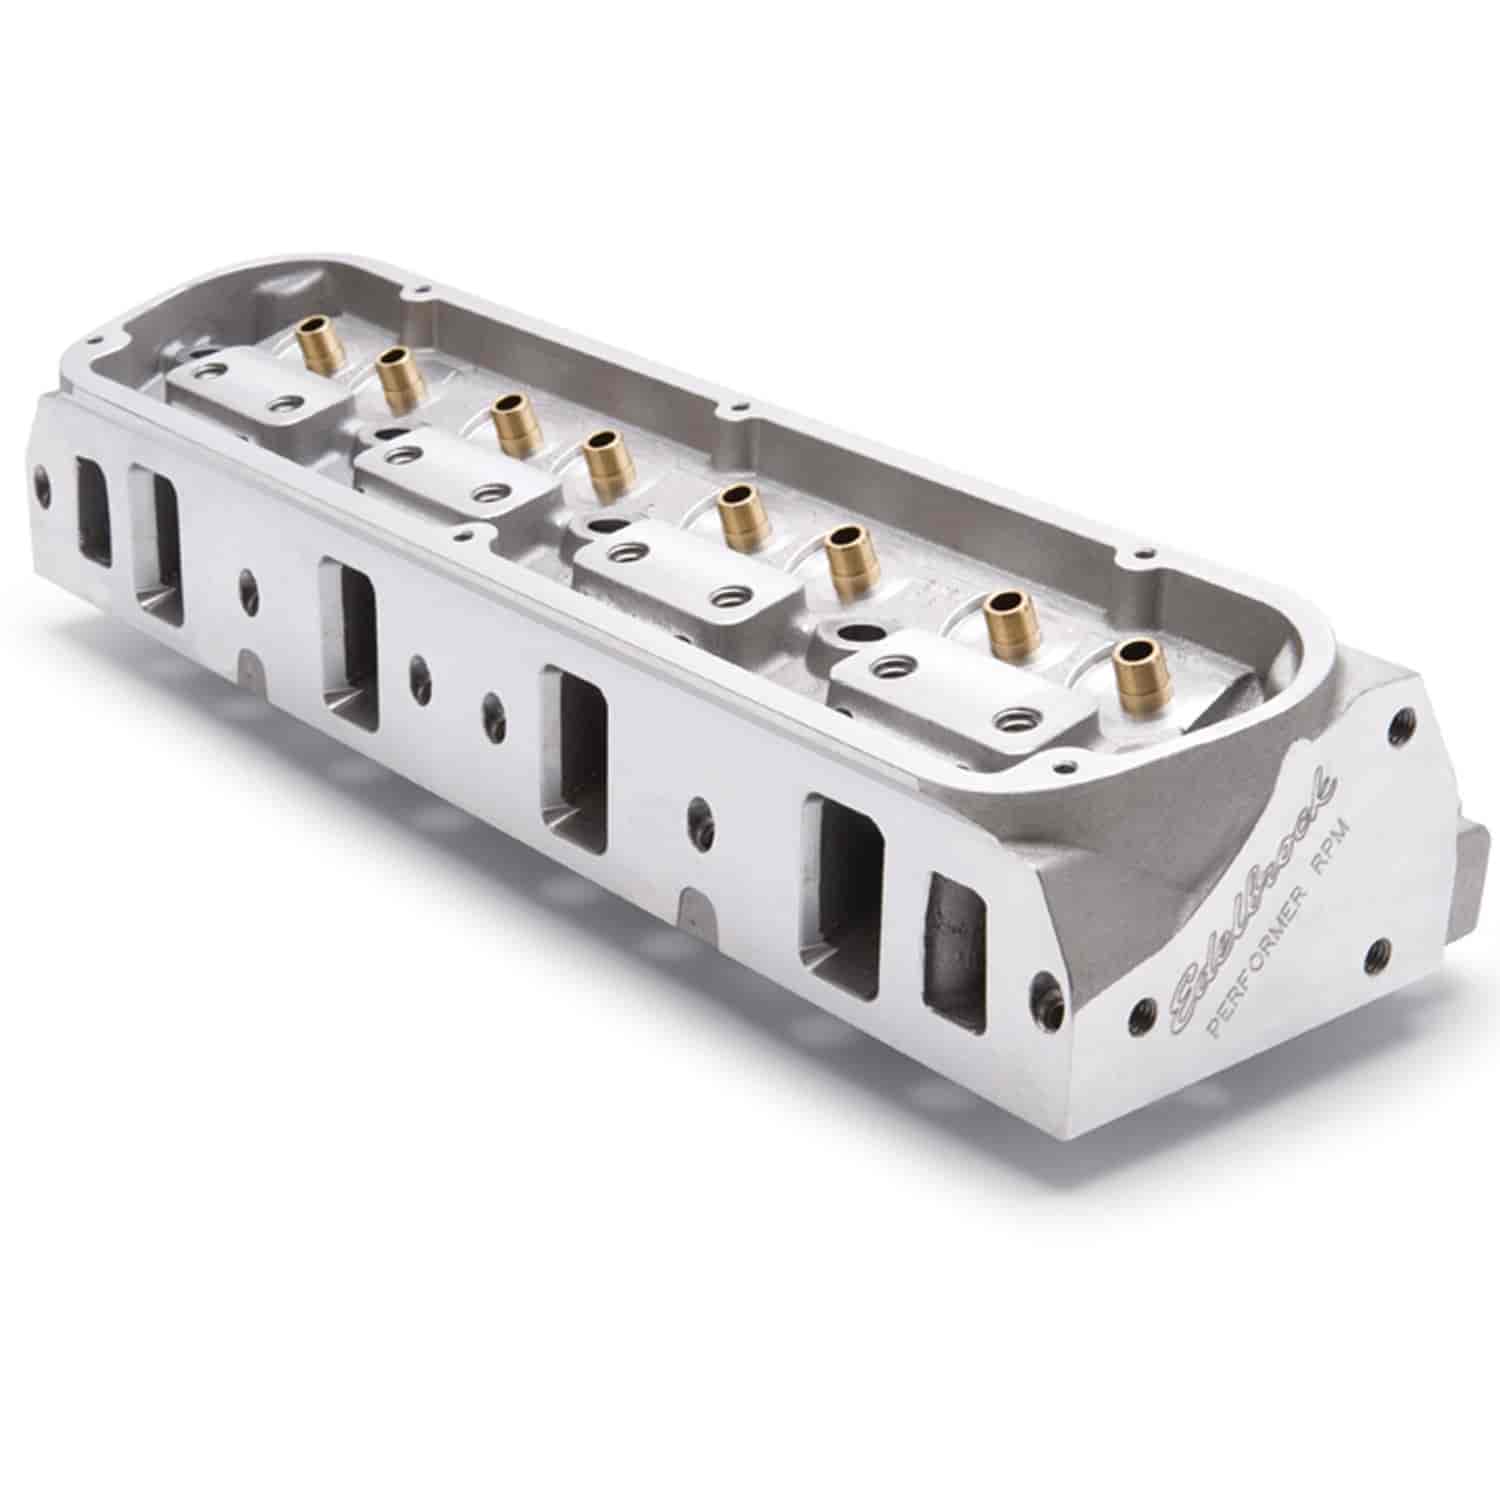 Performer RPM Aluminum Cylinder Head for Small Block Ford